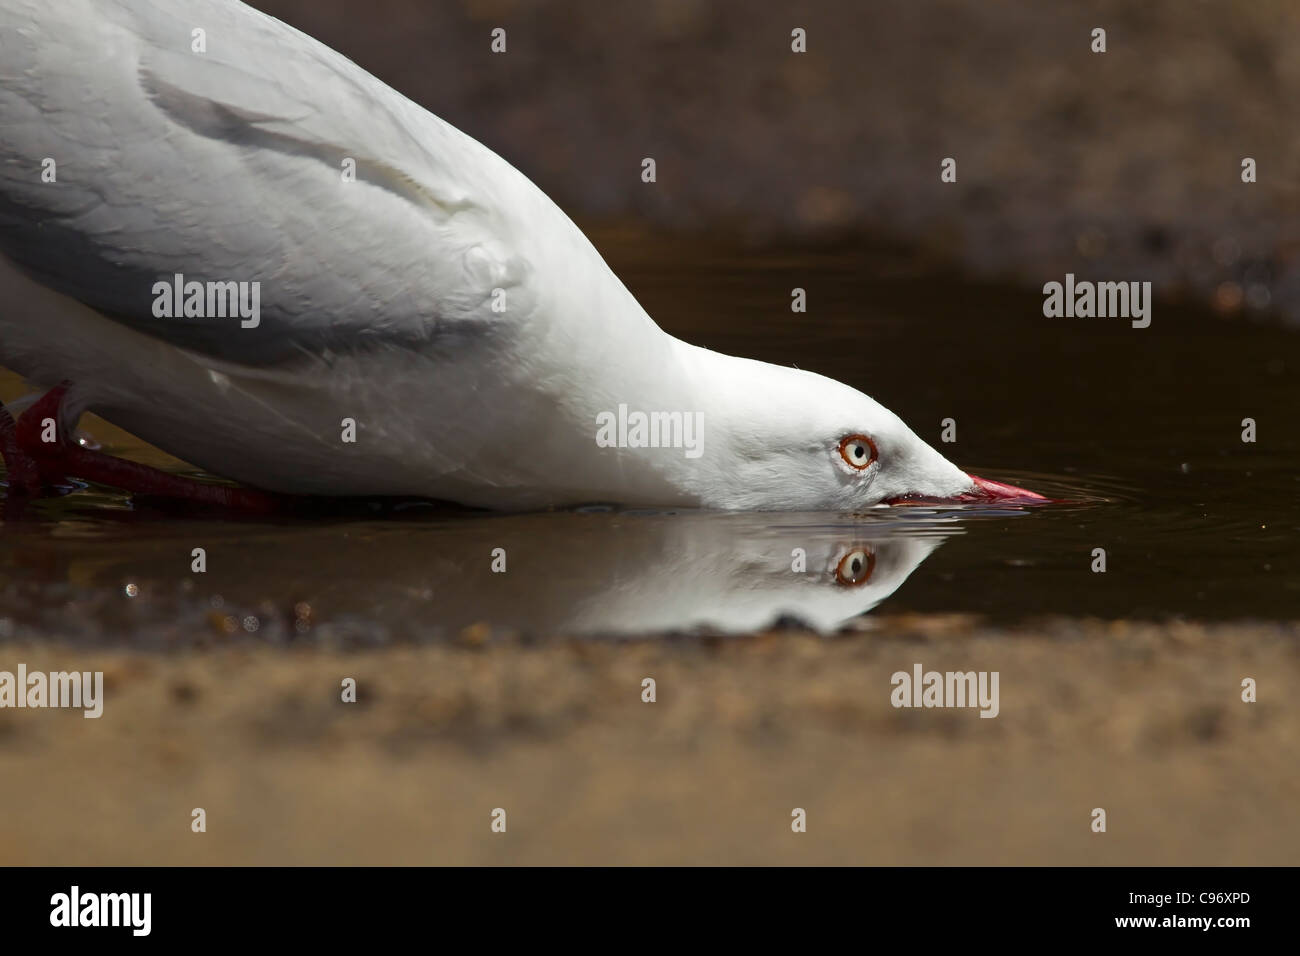 SILVER GULL DRINKING WITH A REFLECTION. Stock Photo